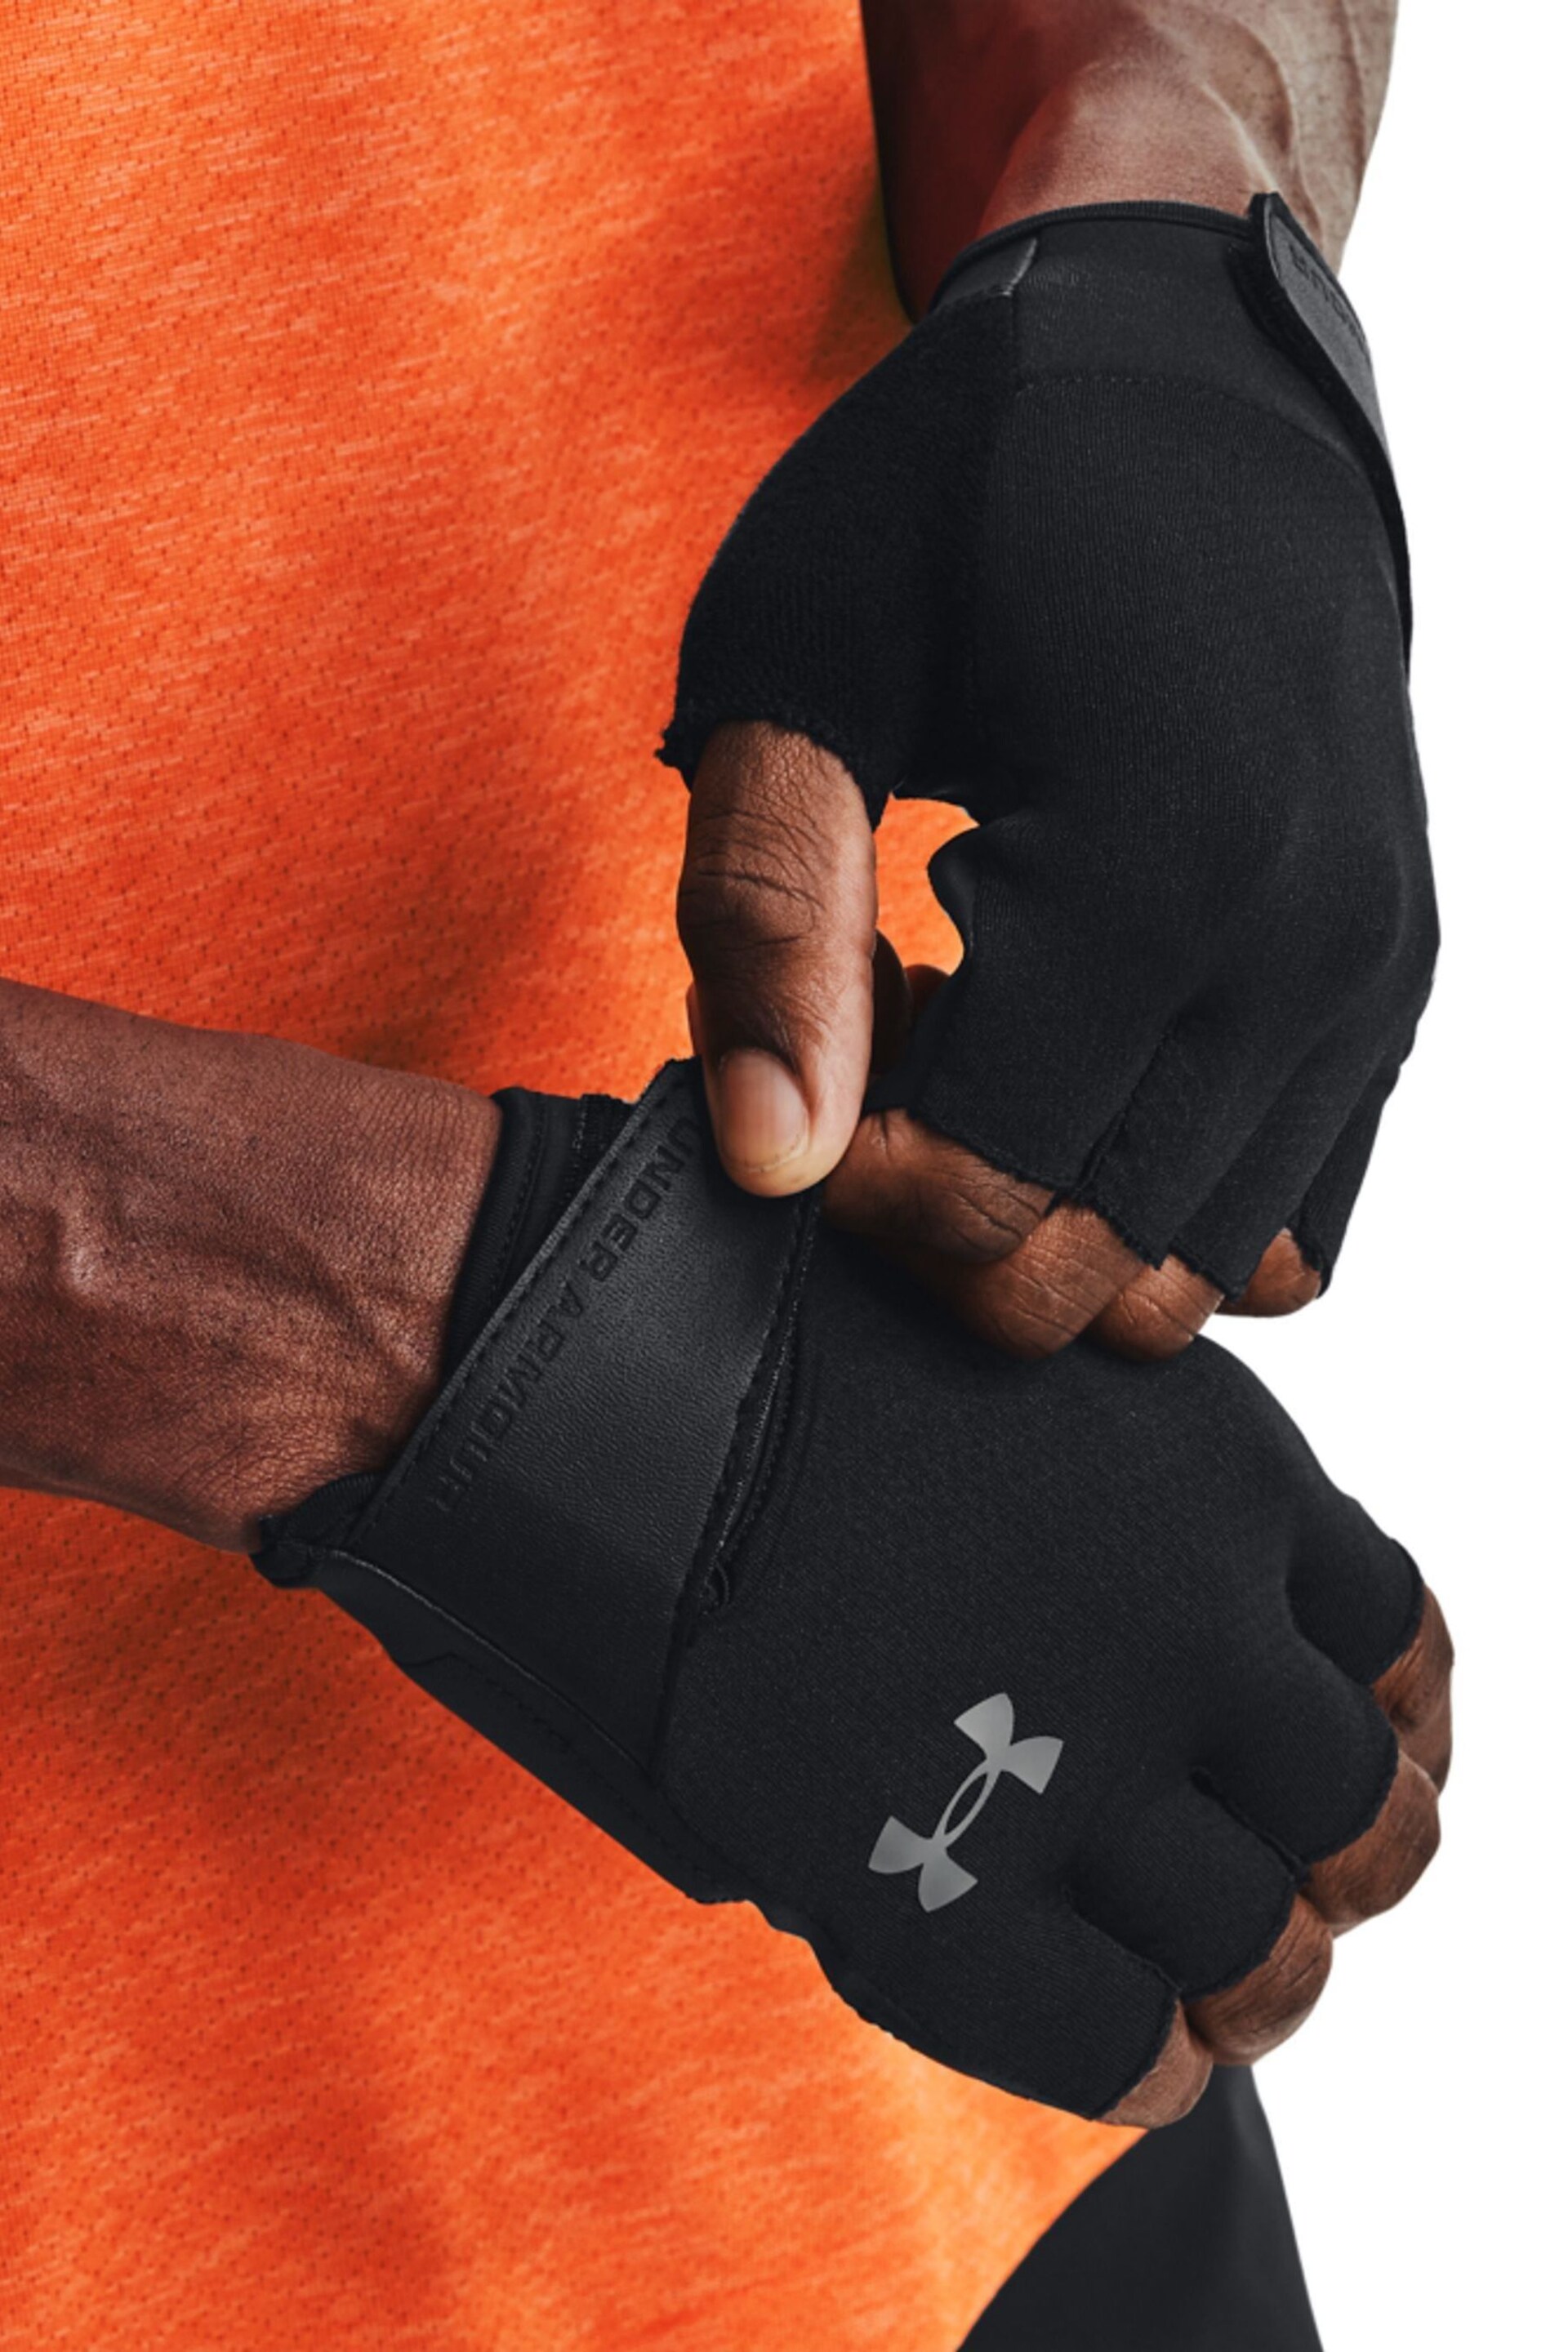 Under Armour Black Training Gloves - Image 3 of 3